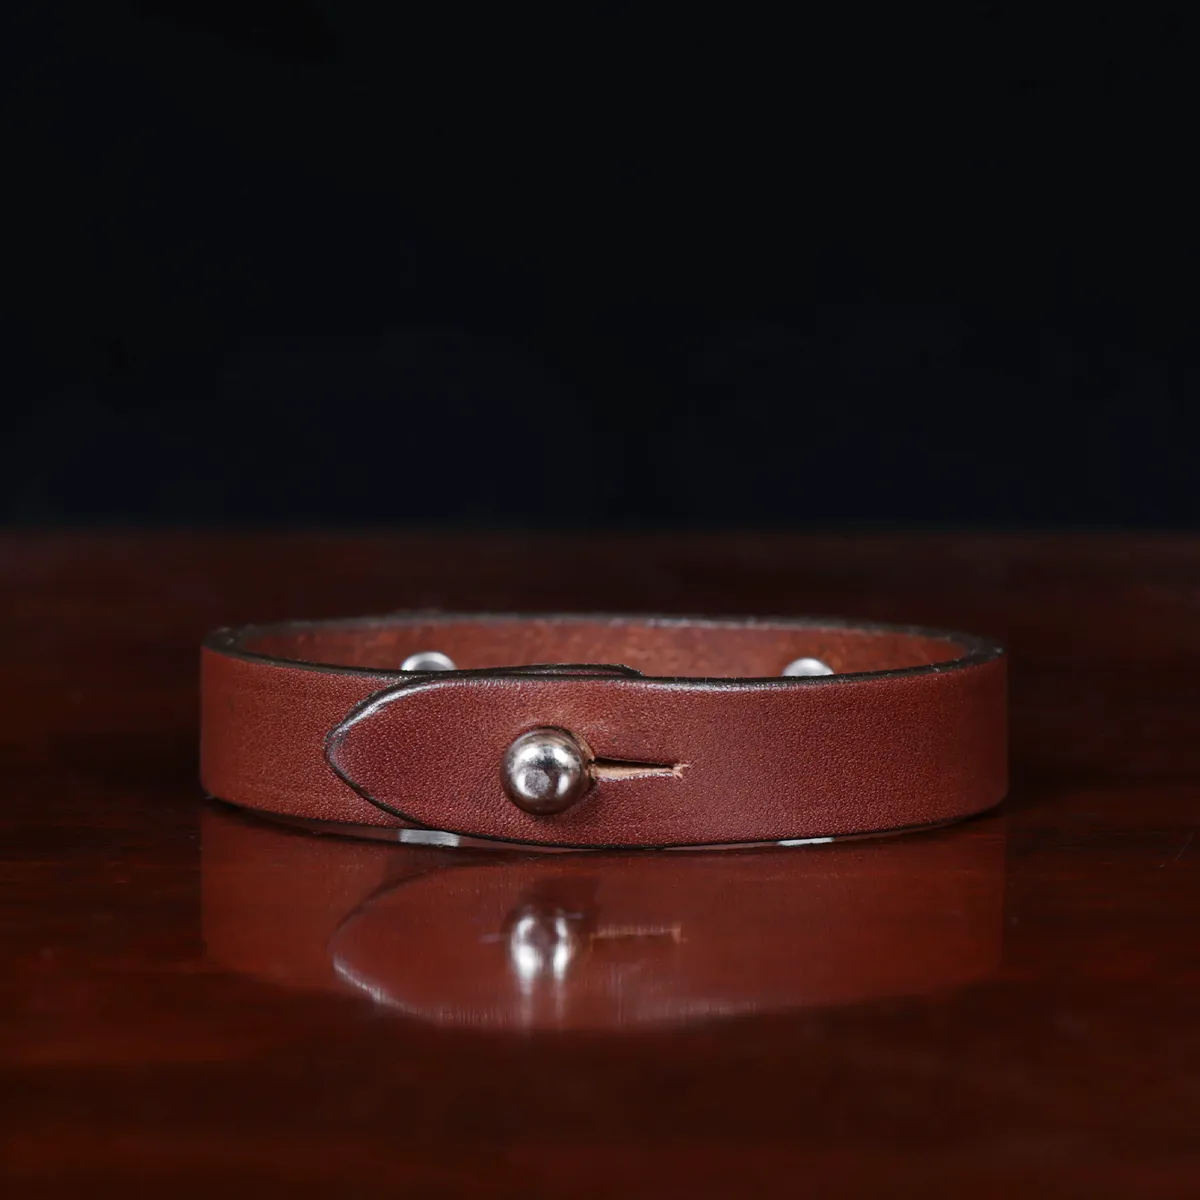 camp bracelet in vintage brown leather on a wooden table and a dark background - nickel - back view